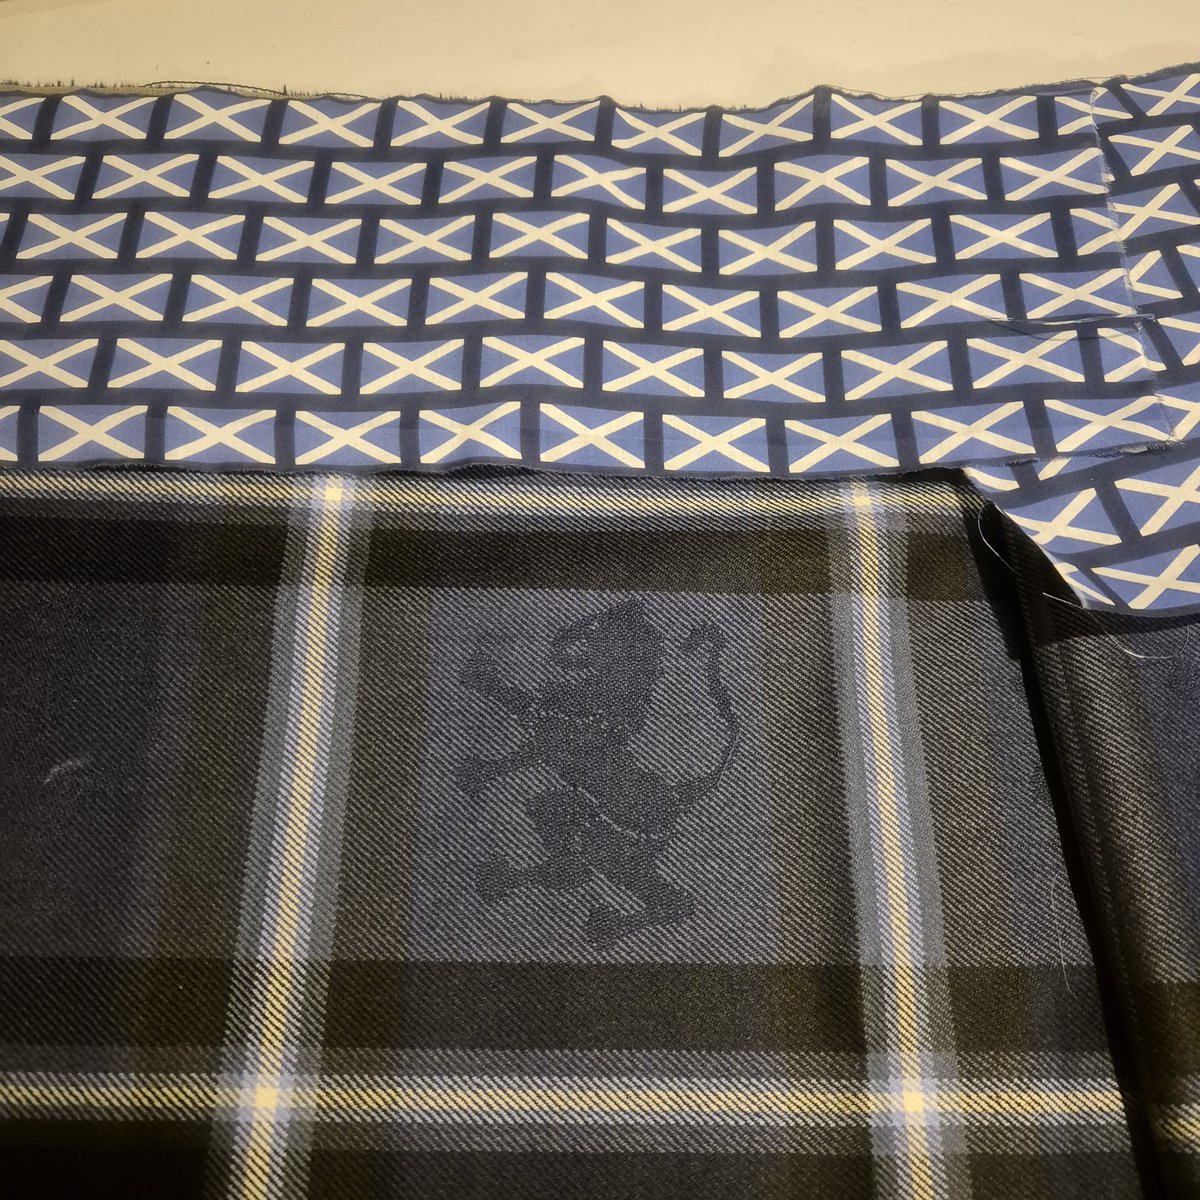 Working on a saltire kilt for the Euros. Looking food so far. #albagubrath